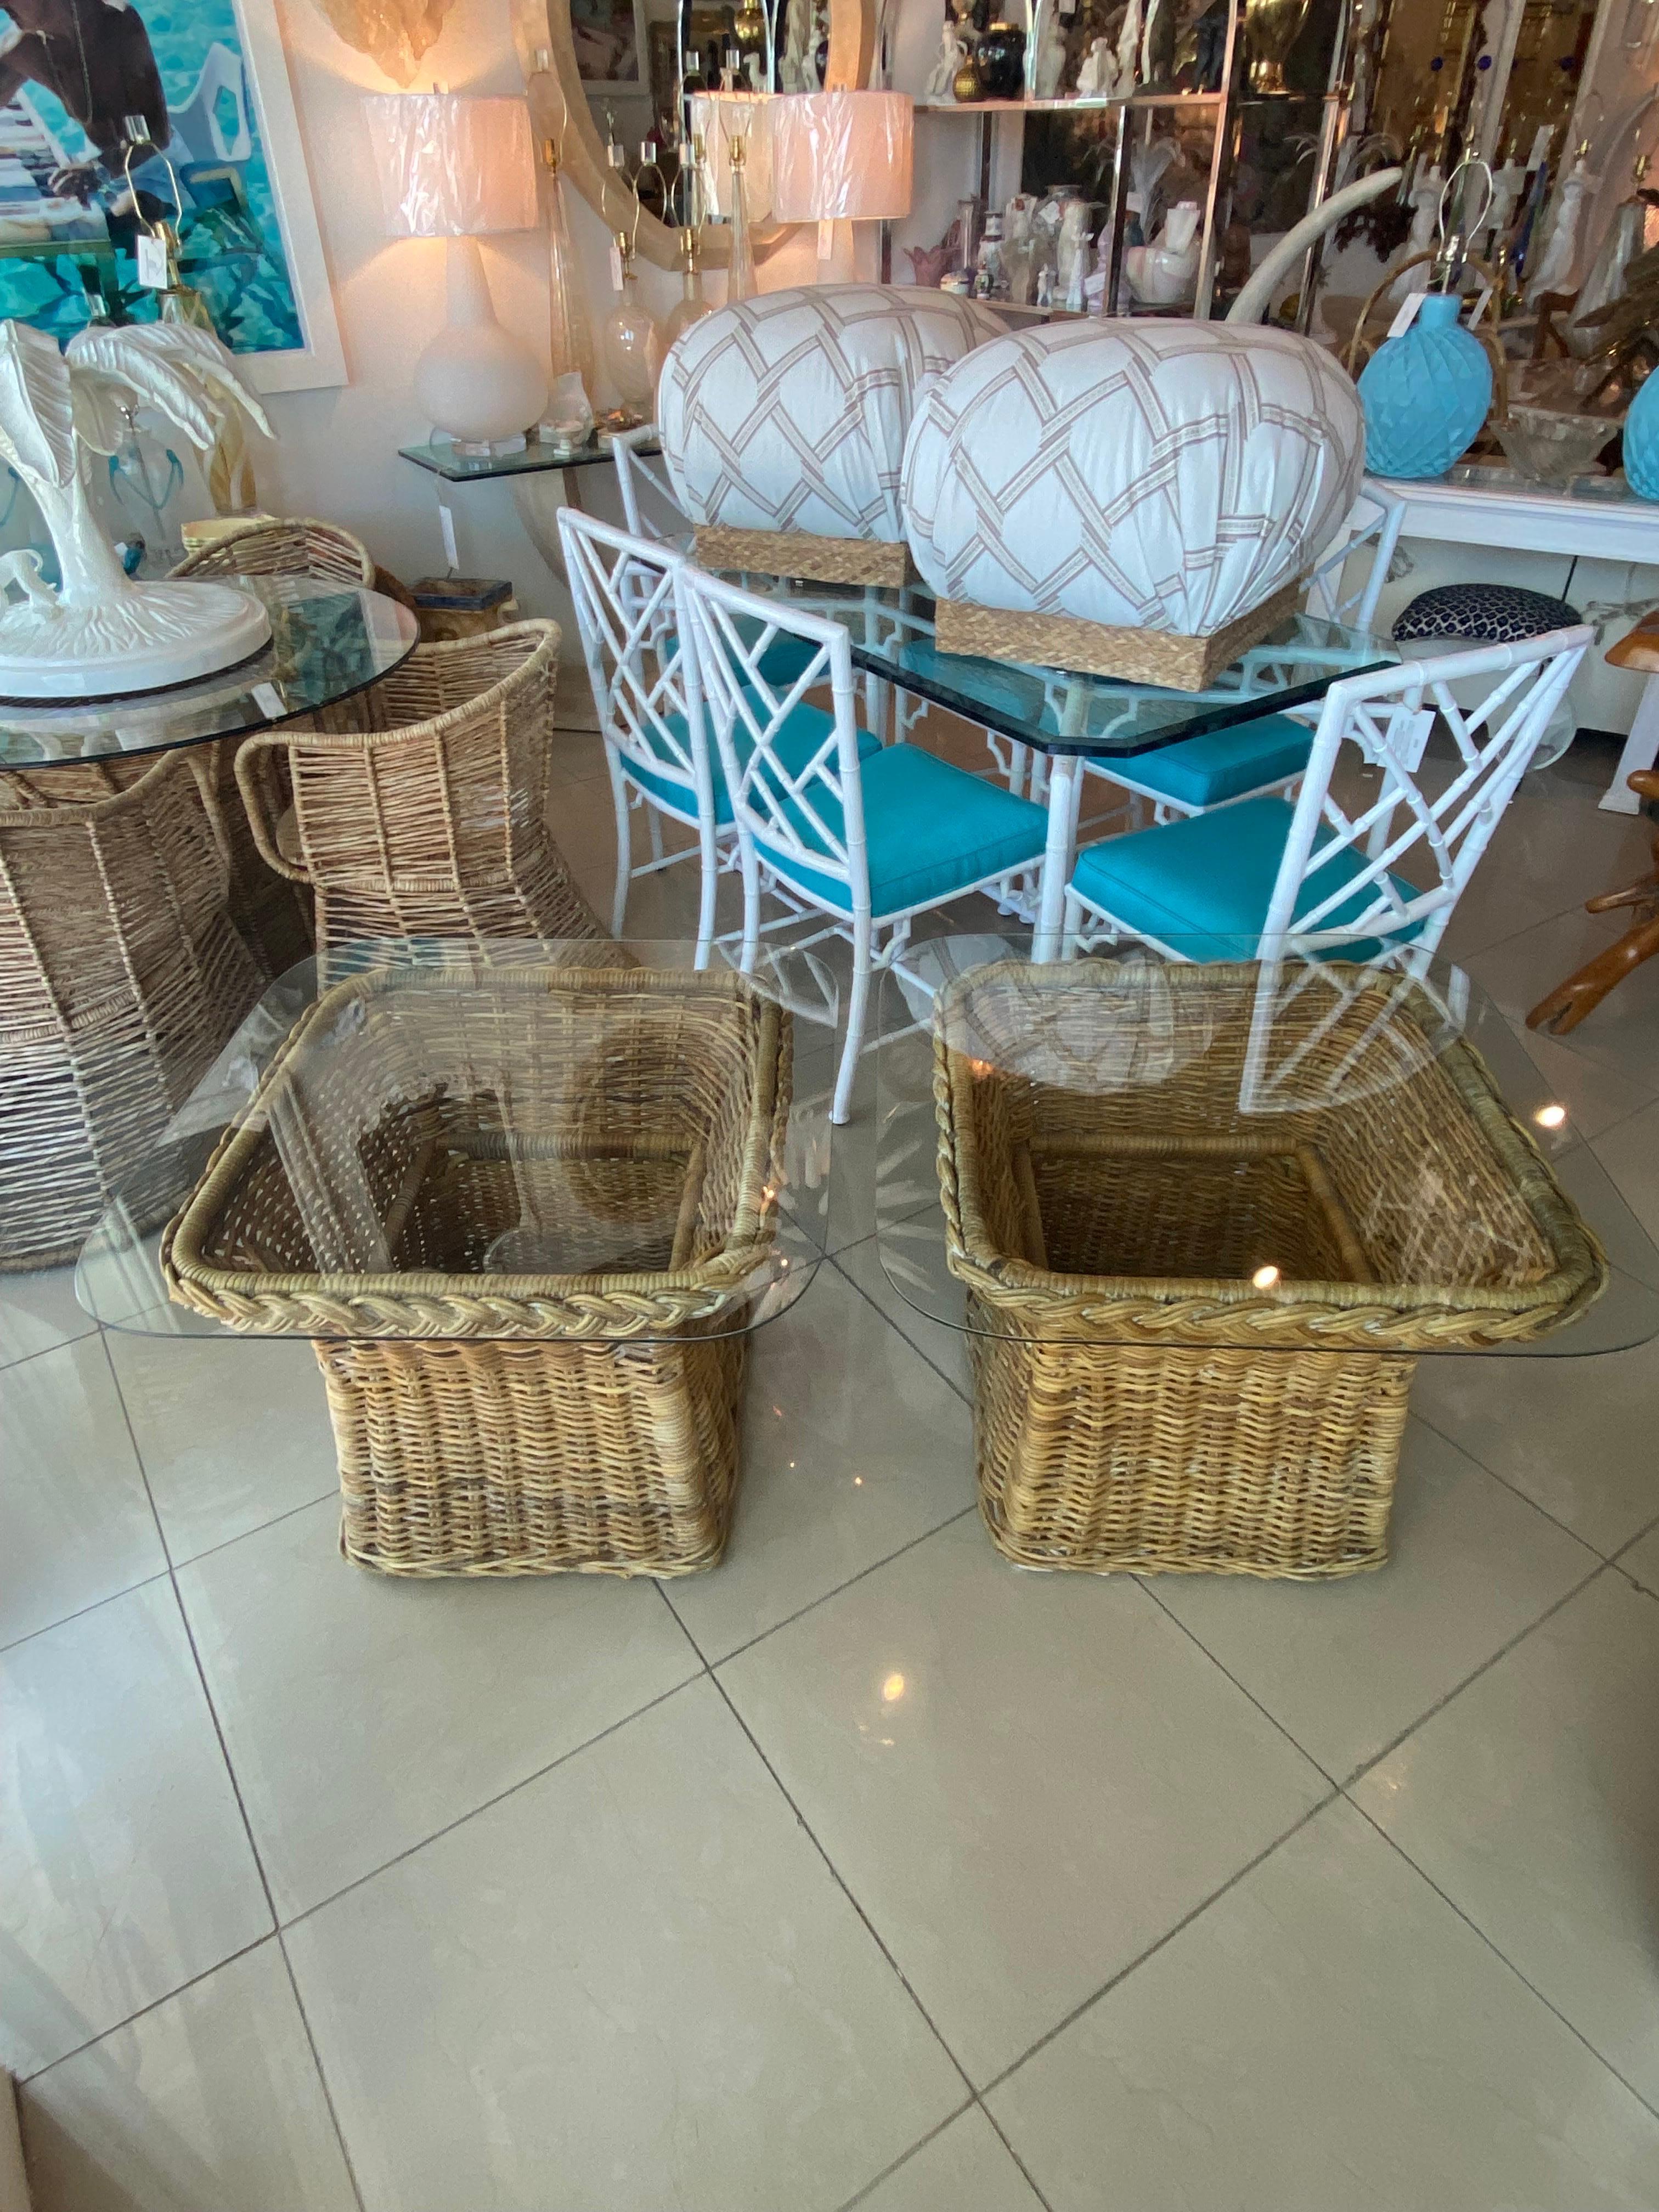 Lovely vintage pair of Wicker Works braided side end tables with new glass top. Glass tops have been newly cut. Natural rattan original finish with color variation. Glass measures 30 x 30 with rounded corners. Table base measures 25.5 W x 25.5 D x